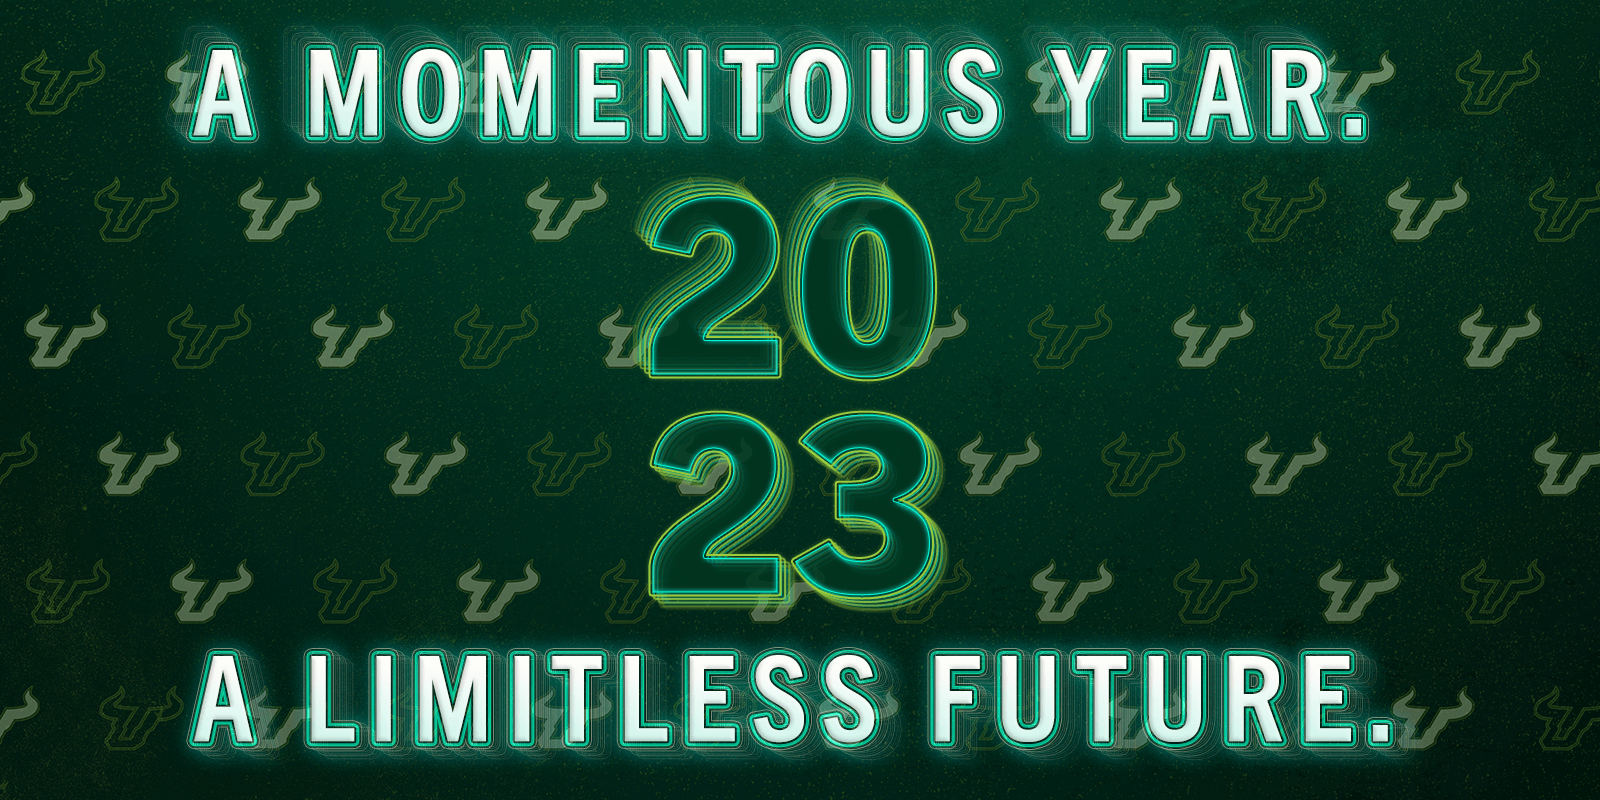 A Momentous Year. A Limitless Future.